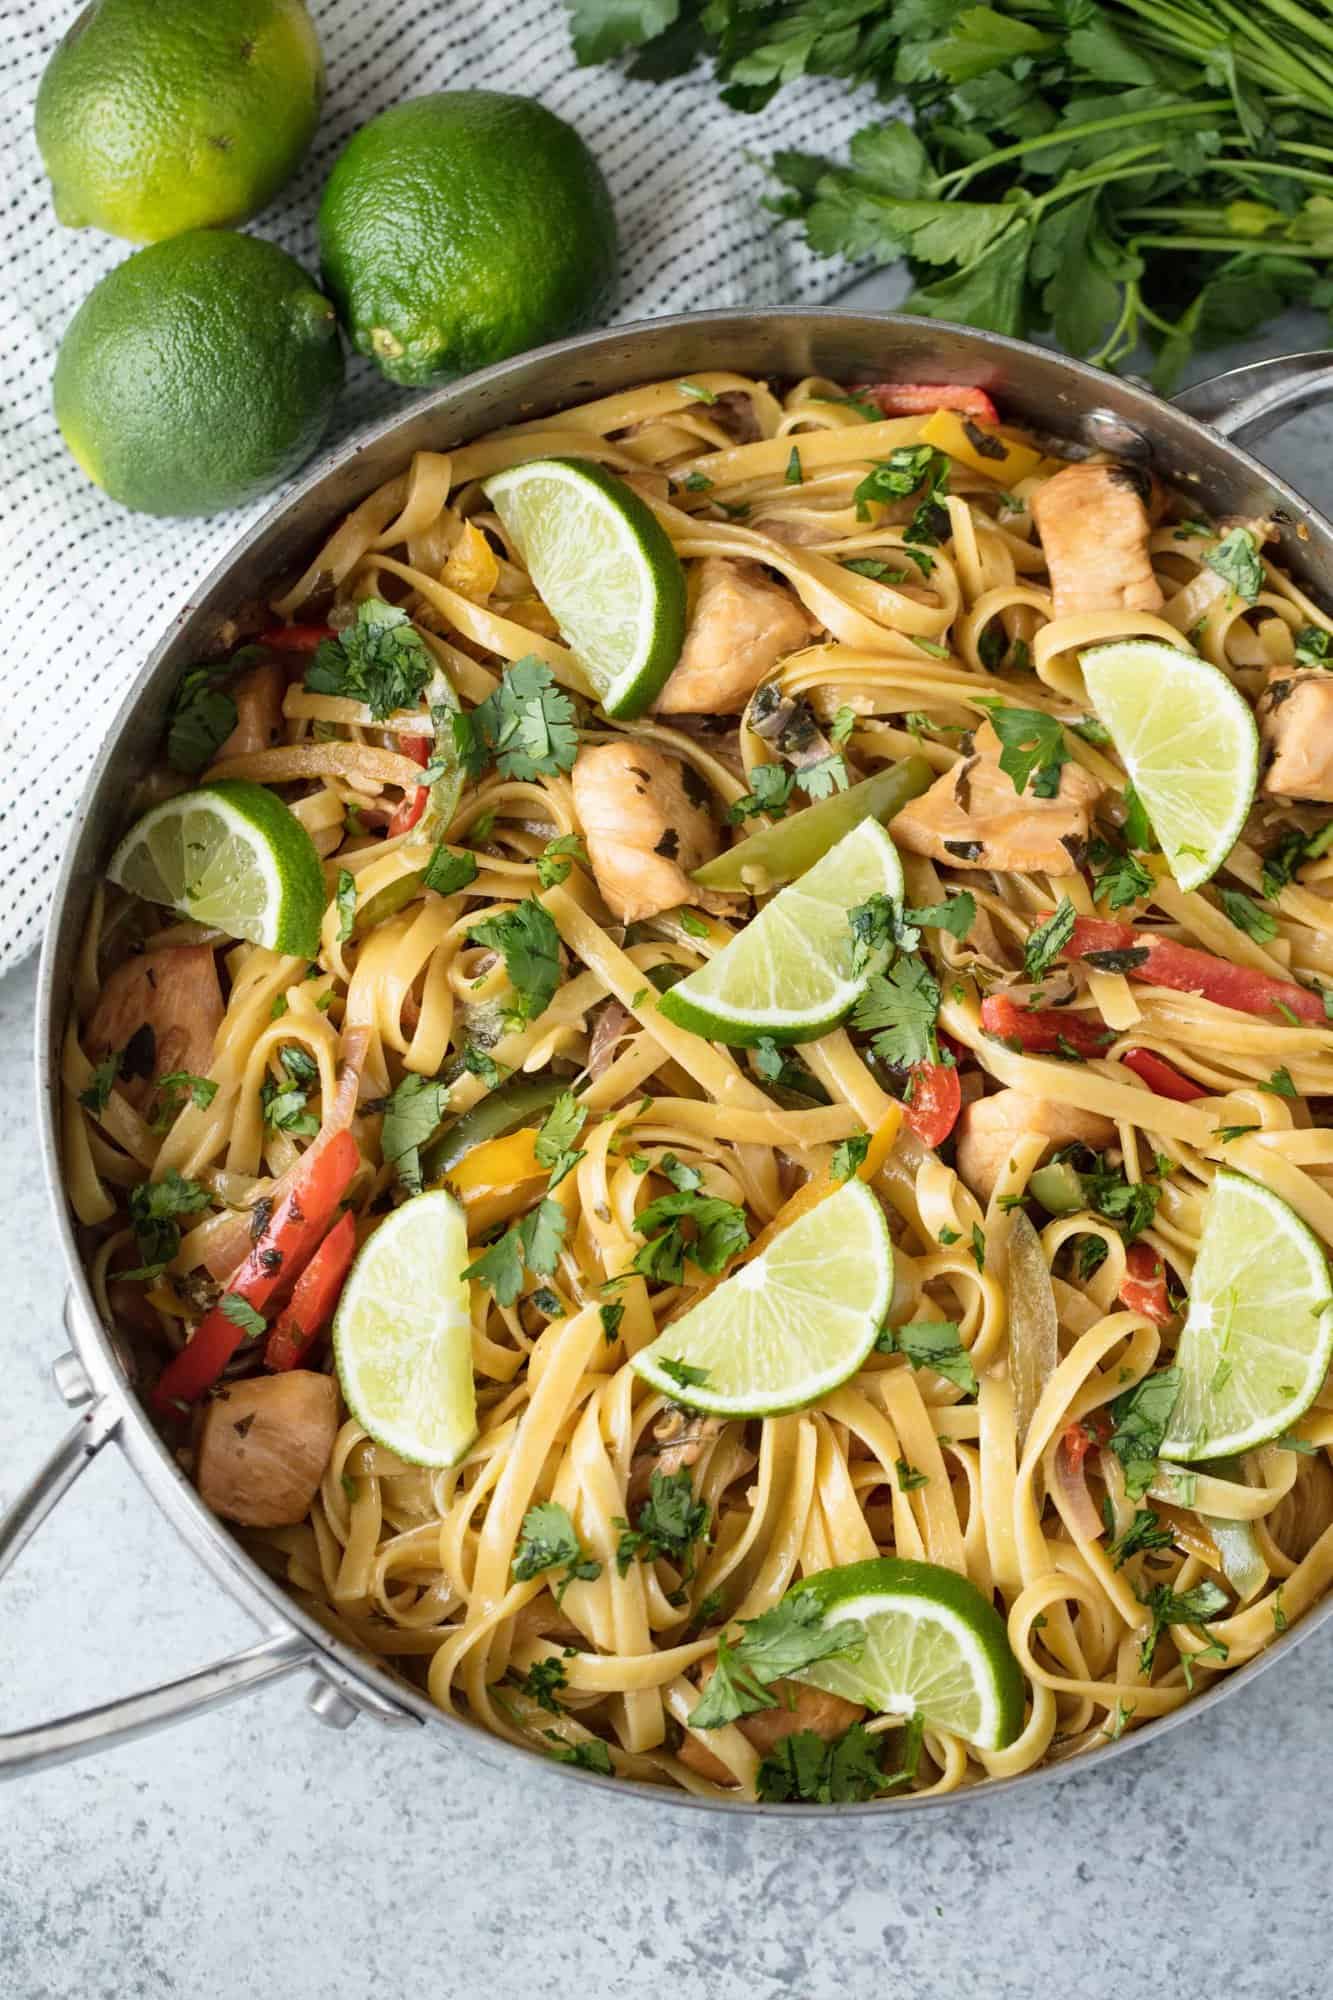 Tequila Lime Chicken Pasta is fun, vibrant, and full of flavor. This easy weeknight dinner is a complete meal with meat, veggies, and pasta all in one amazing dish. And the tequila burns off so it's family friendly too!